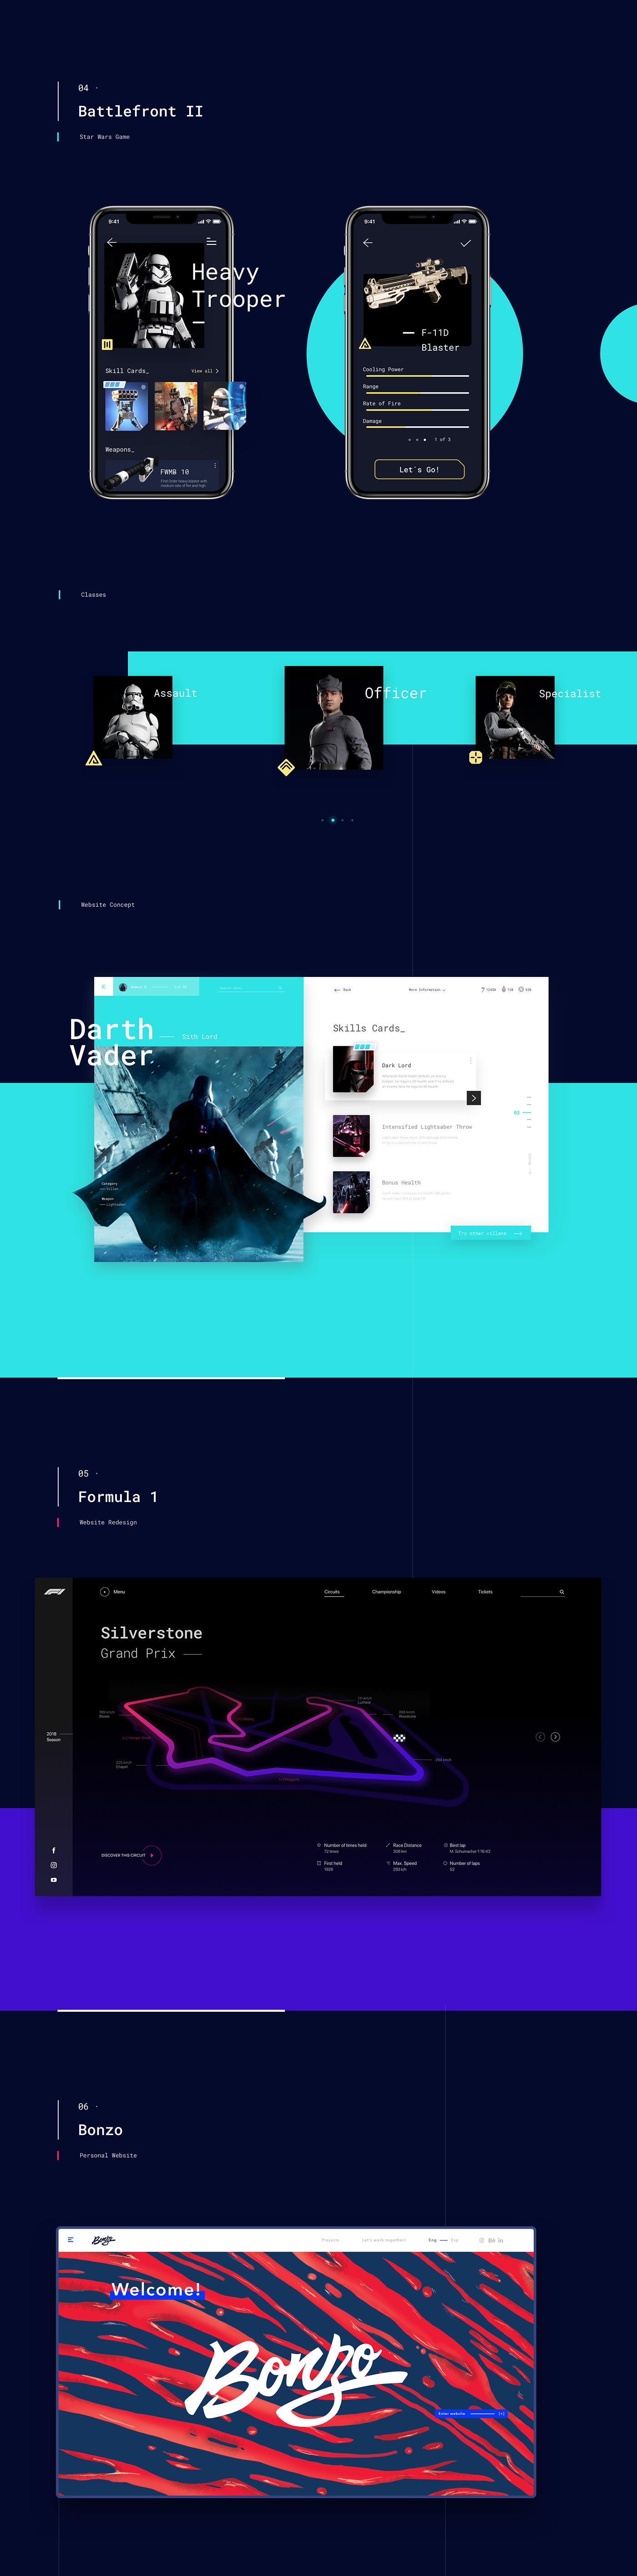 UI visual ux interaction trend design ILLUSTRATION  music sketch Project